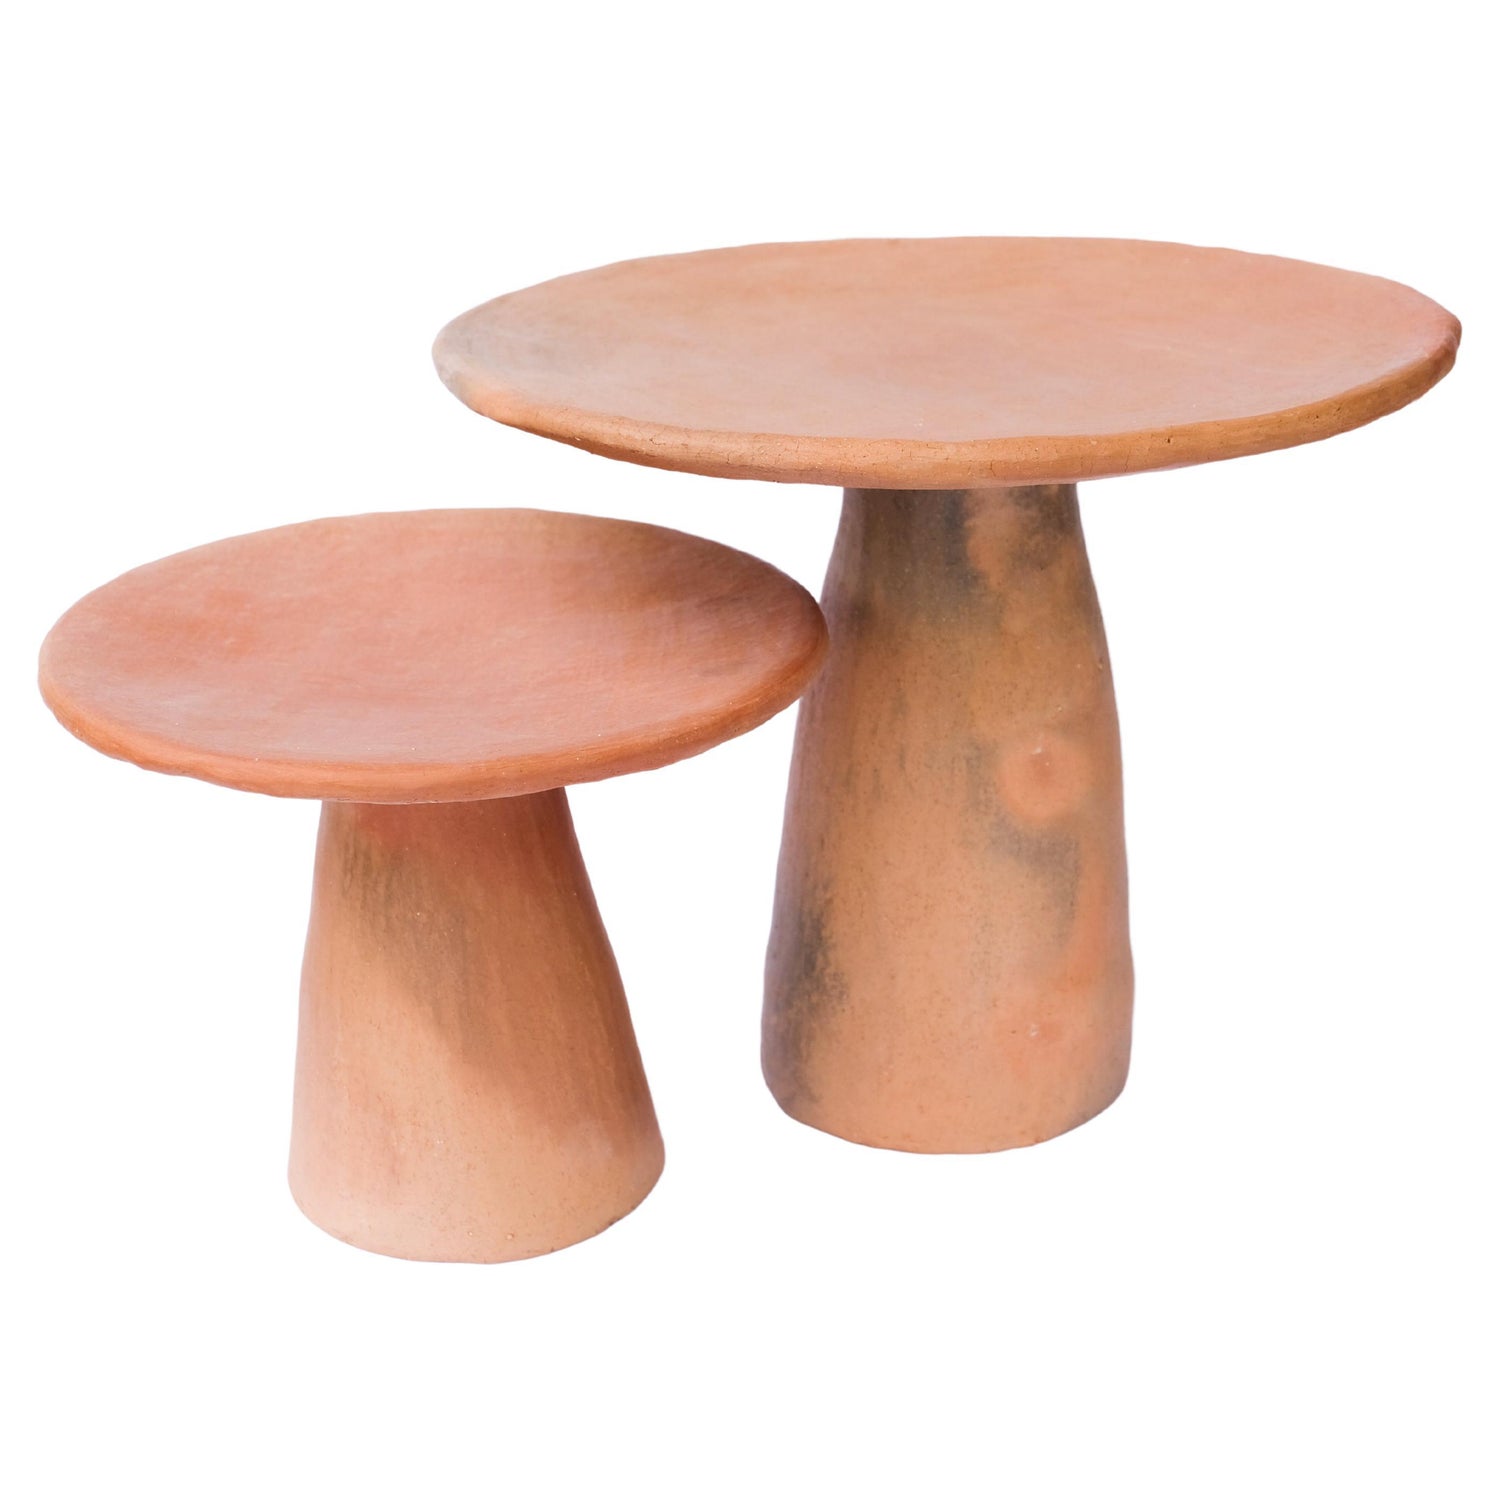 Jbel Zucar Terracotta Side Table Made of Clay, Handcrafted by the Potter  Houda For Sale at 1stDibs | terra cotta side table, terracotta end table,  terracotta coffee table